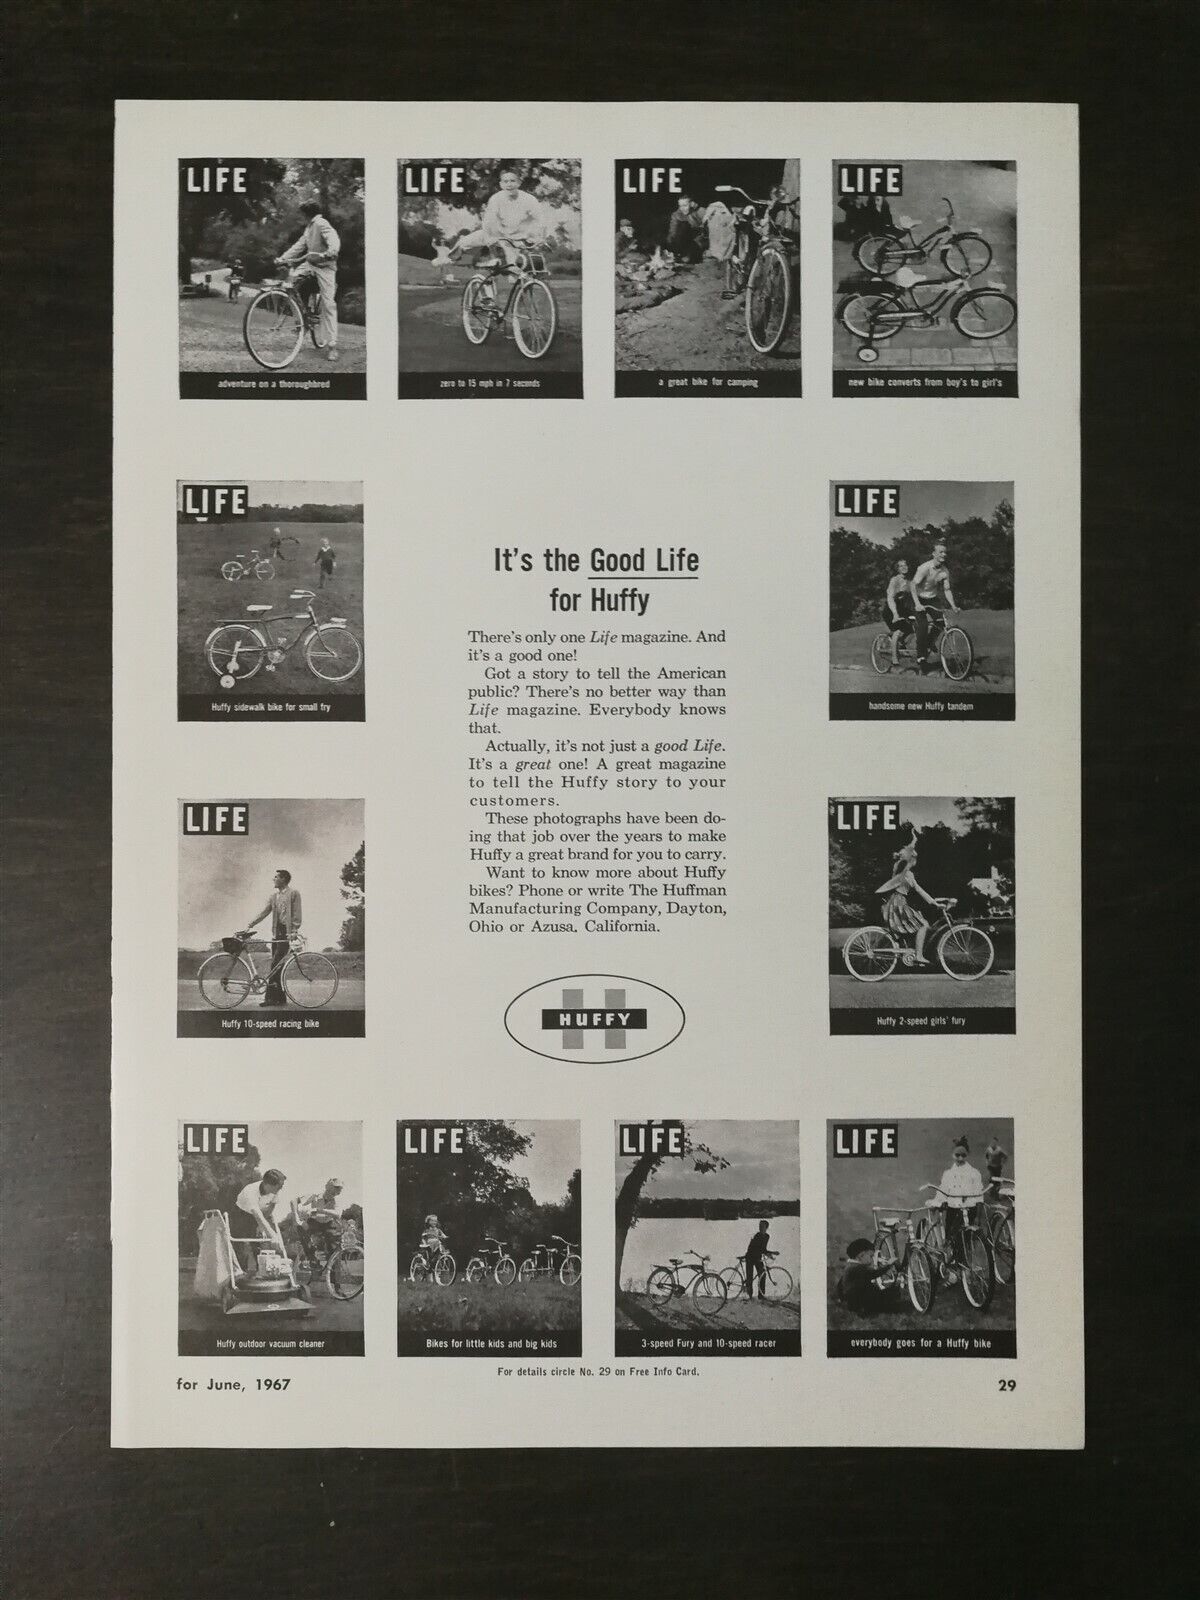 Vintage 1967 Huffy Bicycle Life Magazine Covers Full Page Original Ad